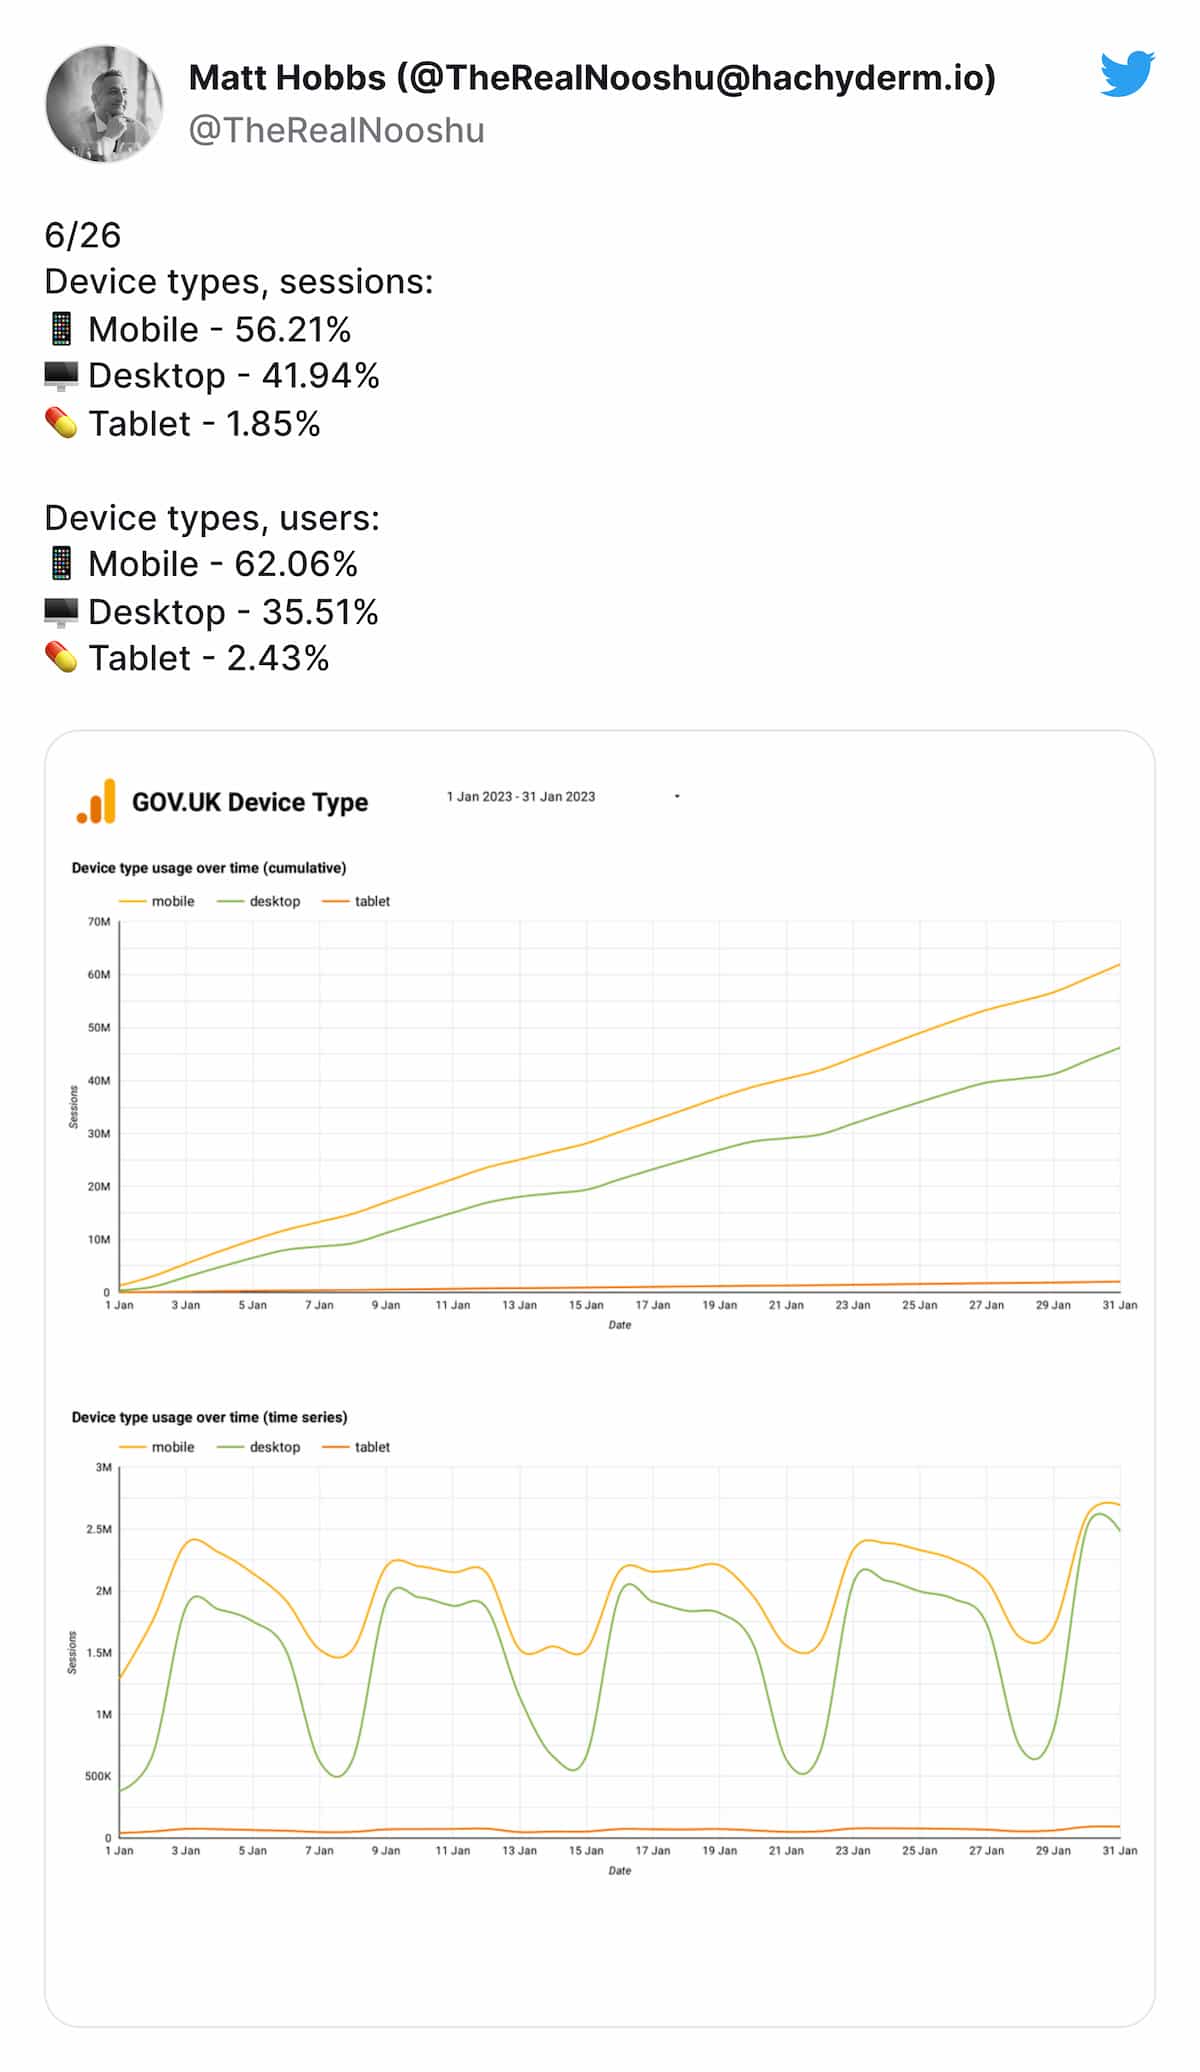 Device type stats for January 2023 available here: https://twitter.com/TheRealNooshu/status/1620739192270749696